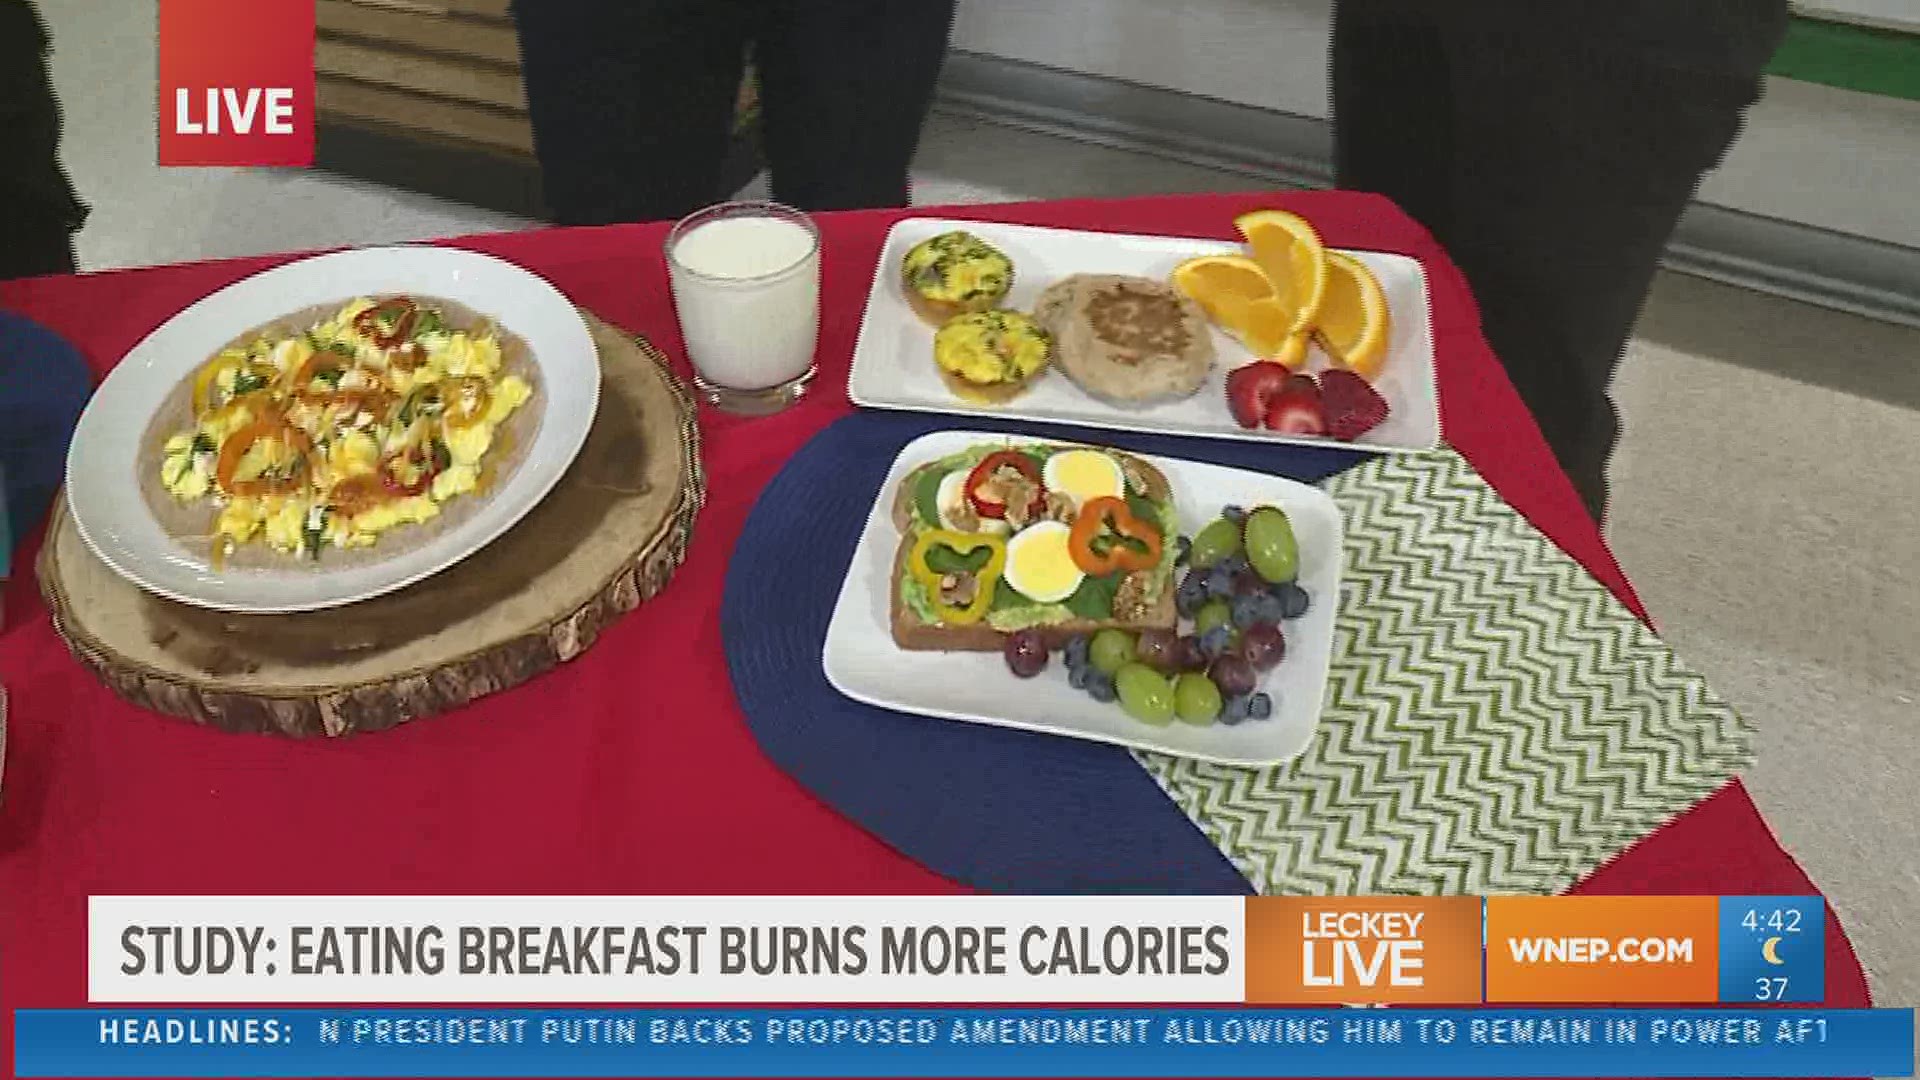 Breakfast might just be making a comeback, especially if you’re trying to lose weight.